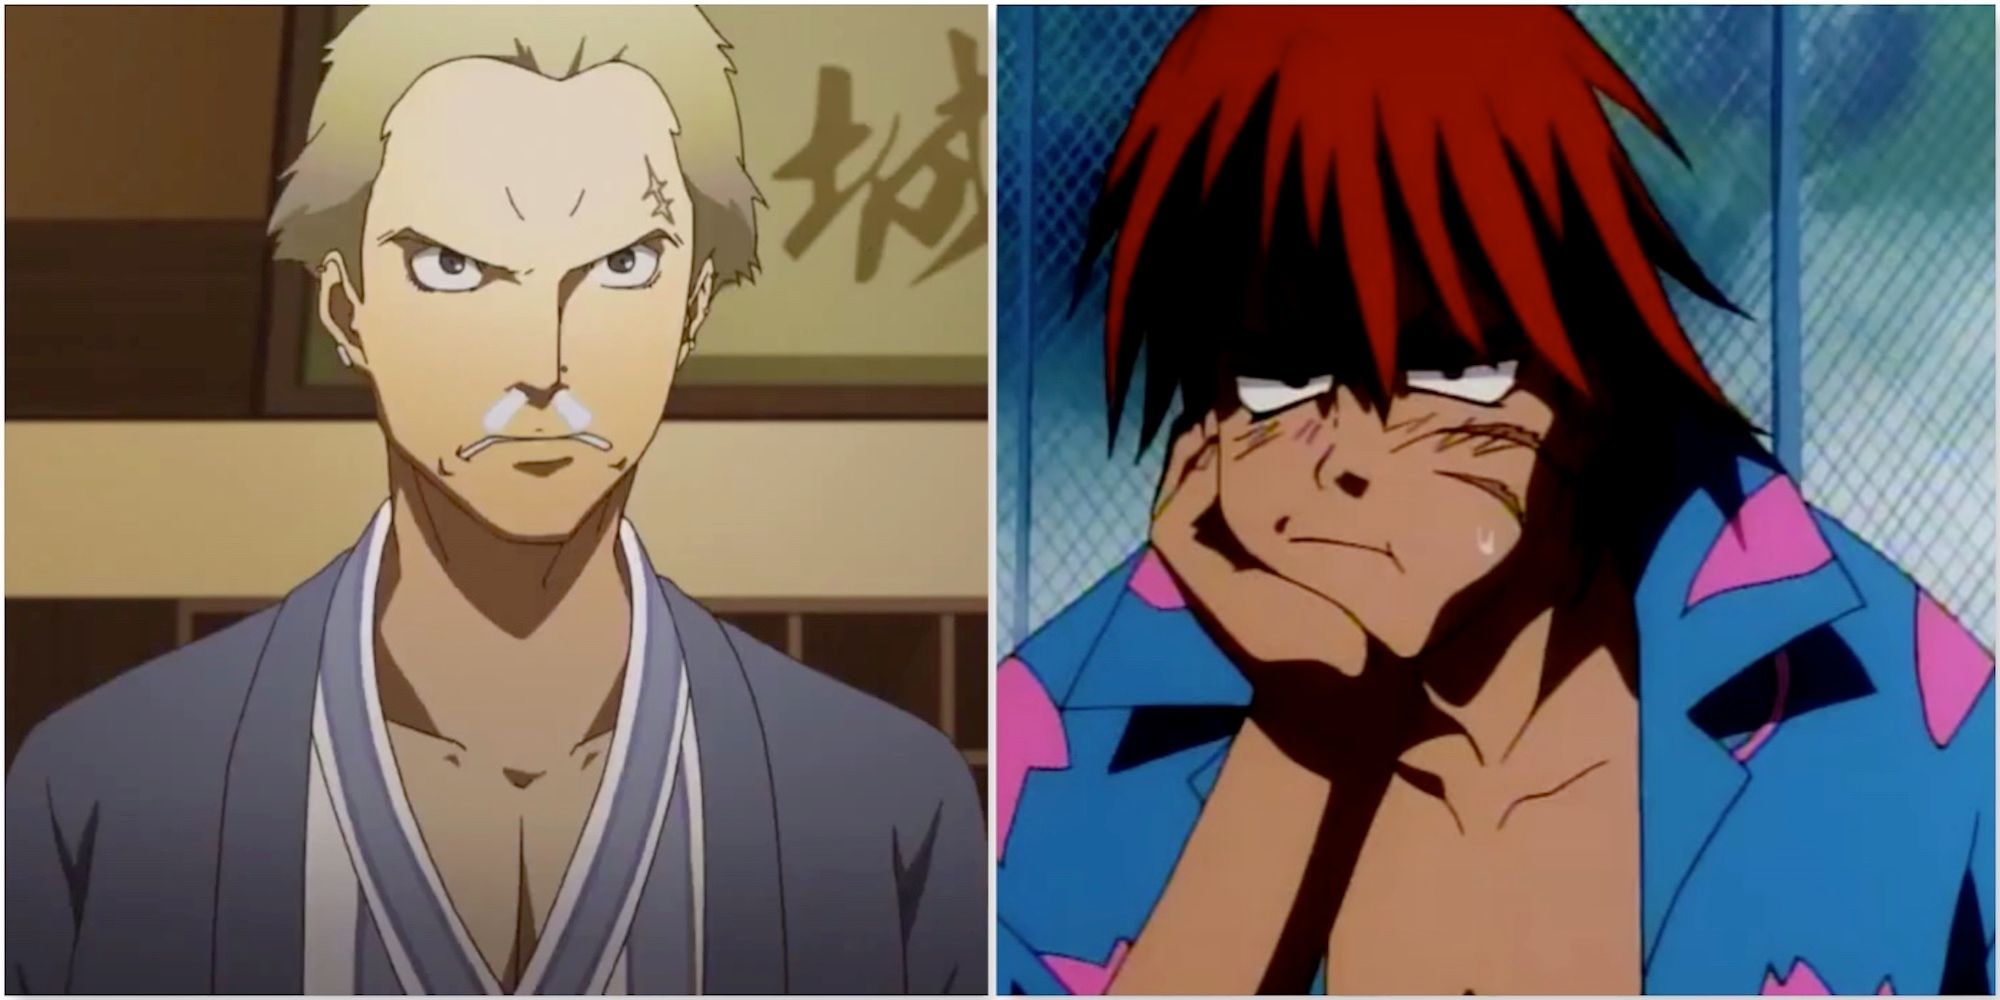 Kanji from Persona 4: The Animation and Gene from Outlaw Star